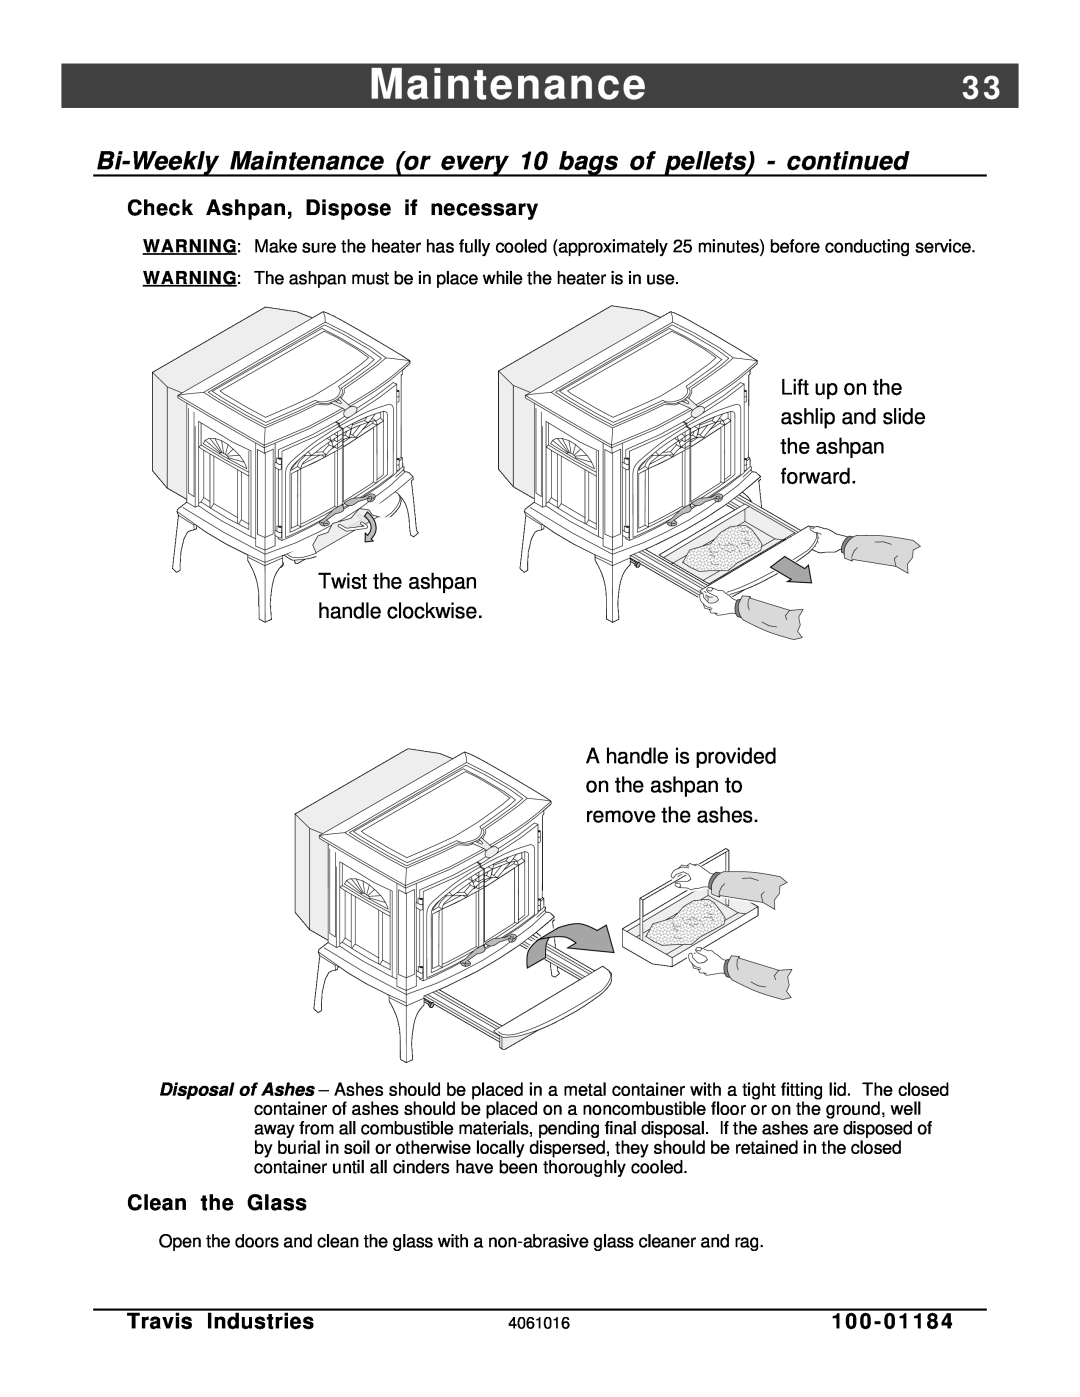 Lopi Leyden Pellet Stove manual Check Ashpan, Dispose if necessary, Clean the Glass, Maintenance3, Travis Industries, 1 0 